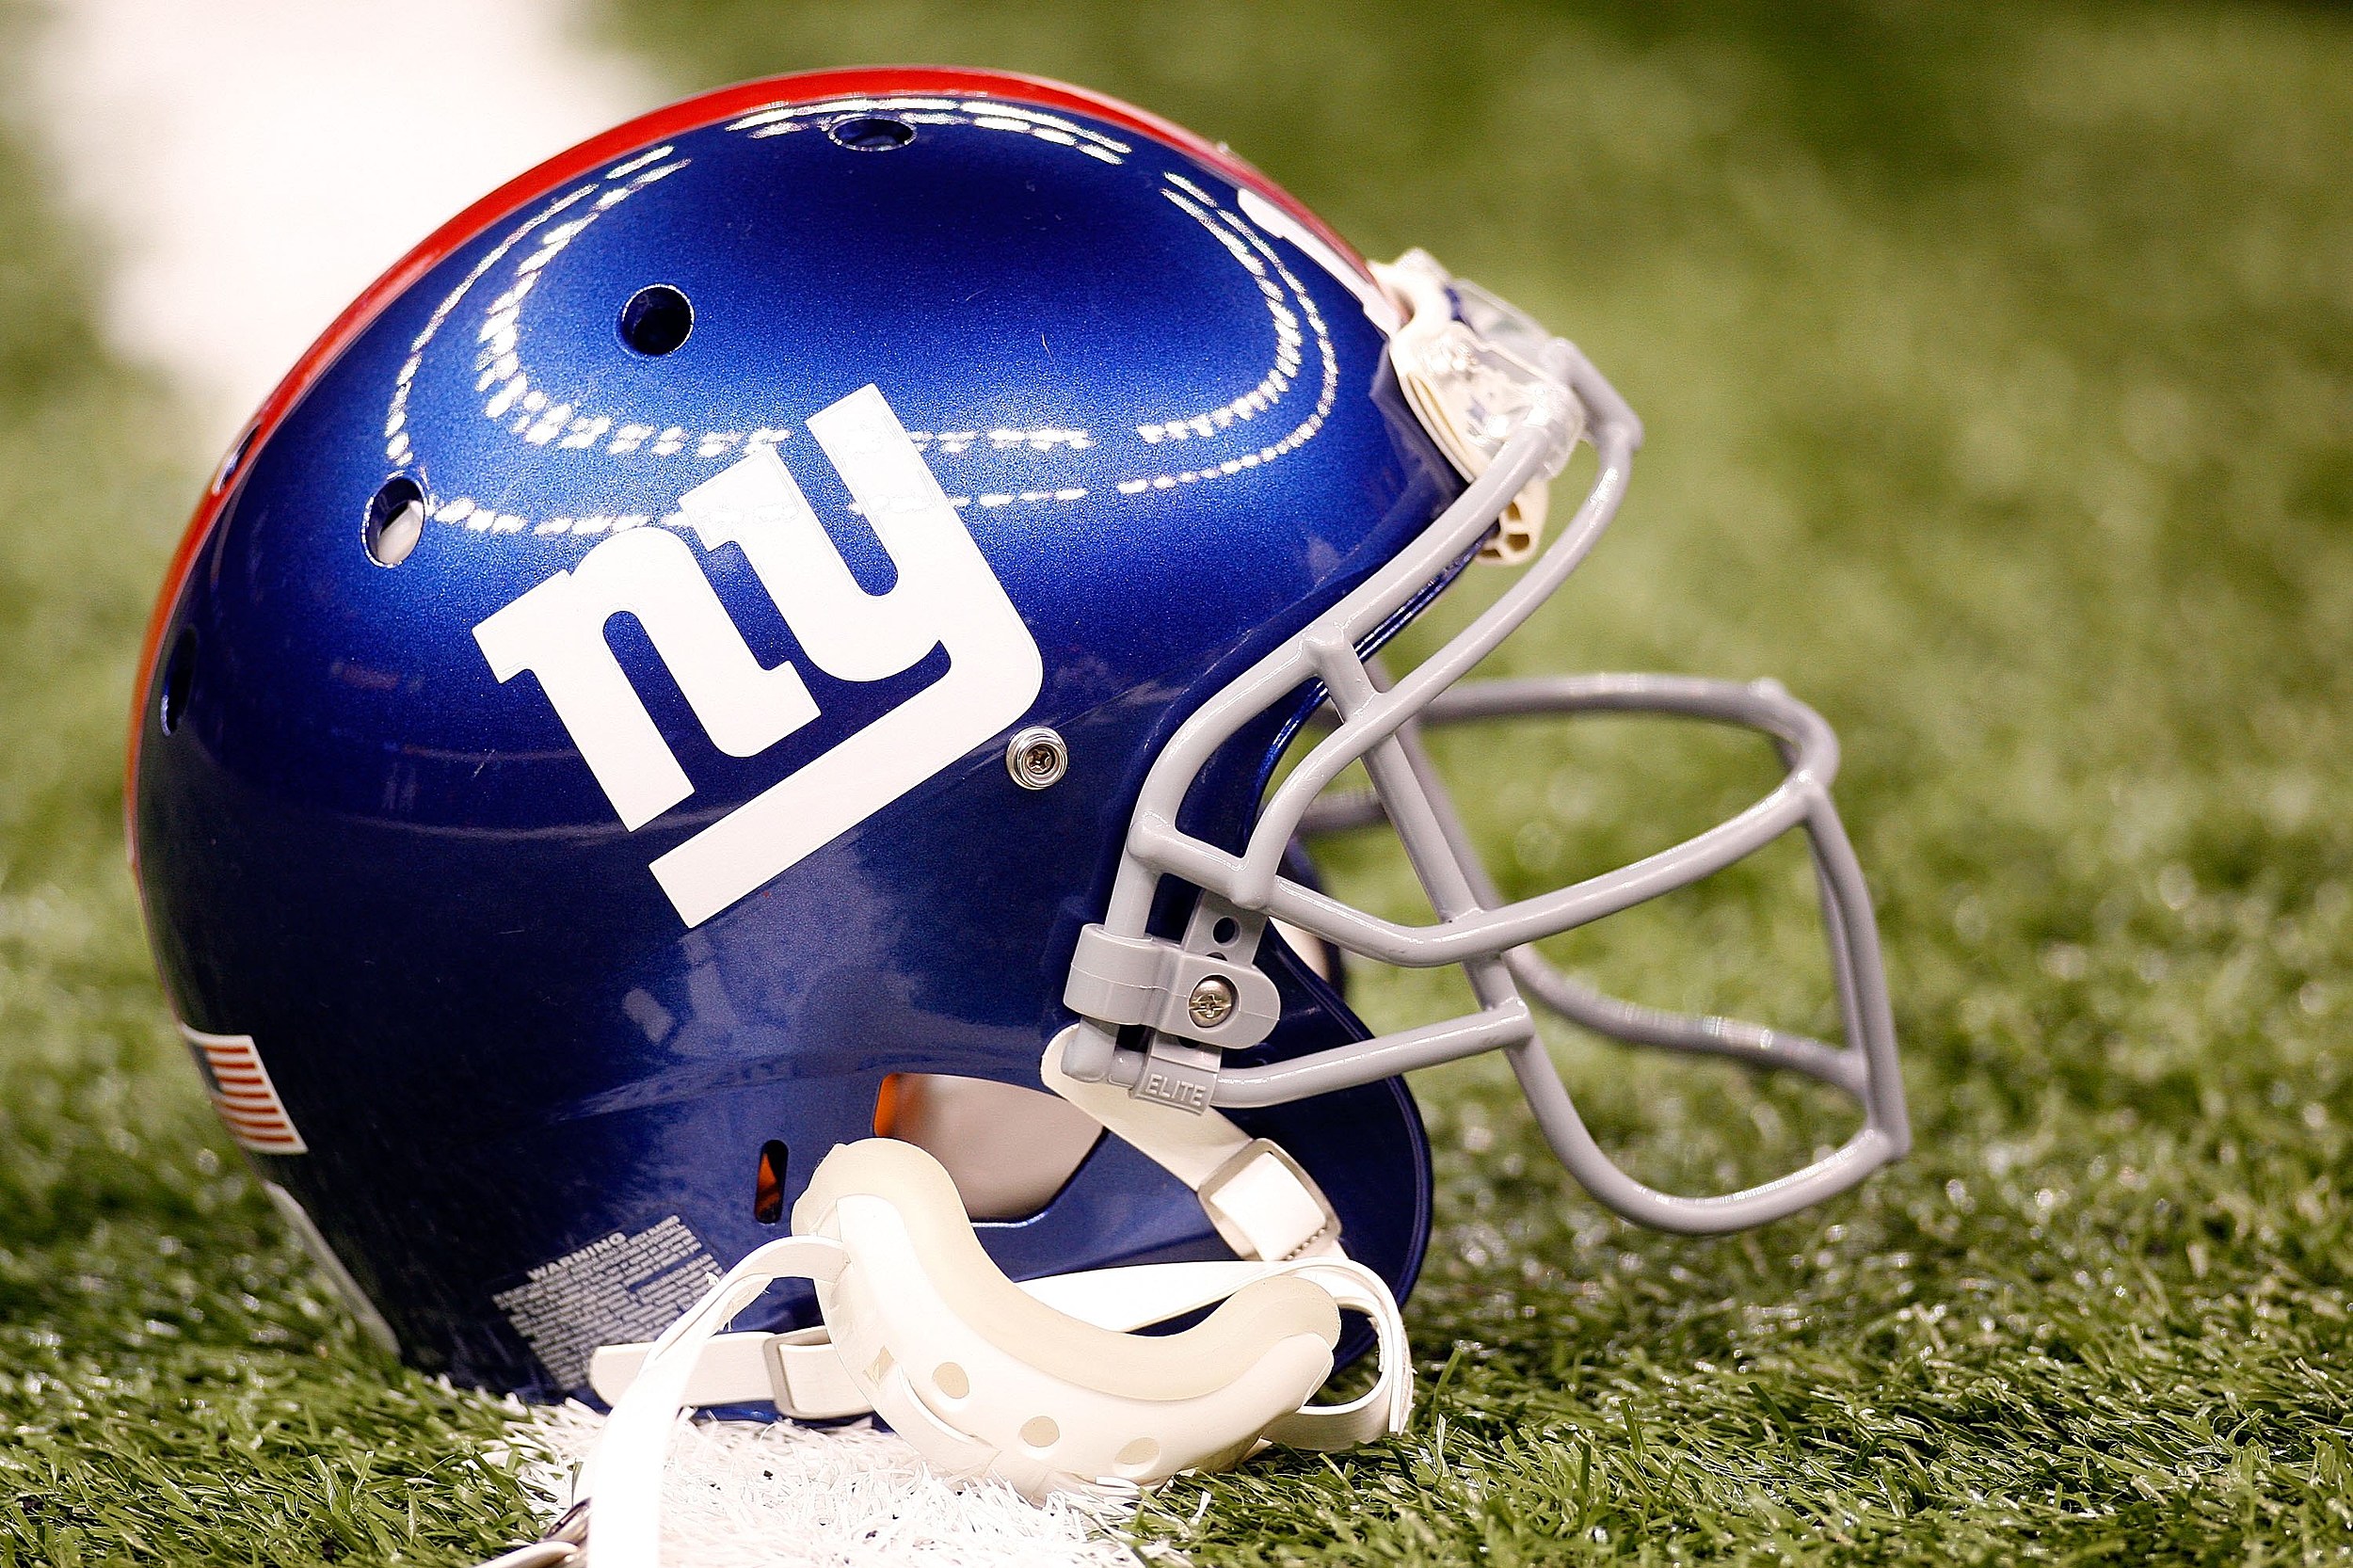 Rider University and the New York Giants announce new multi-year